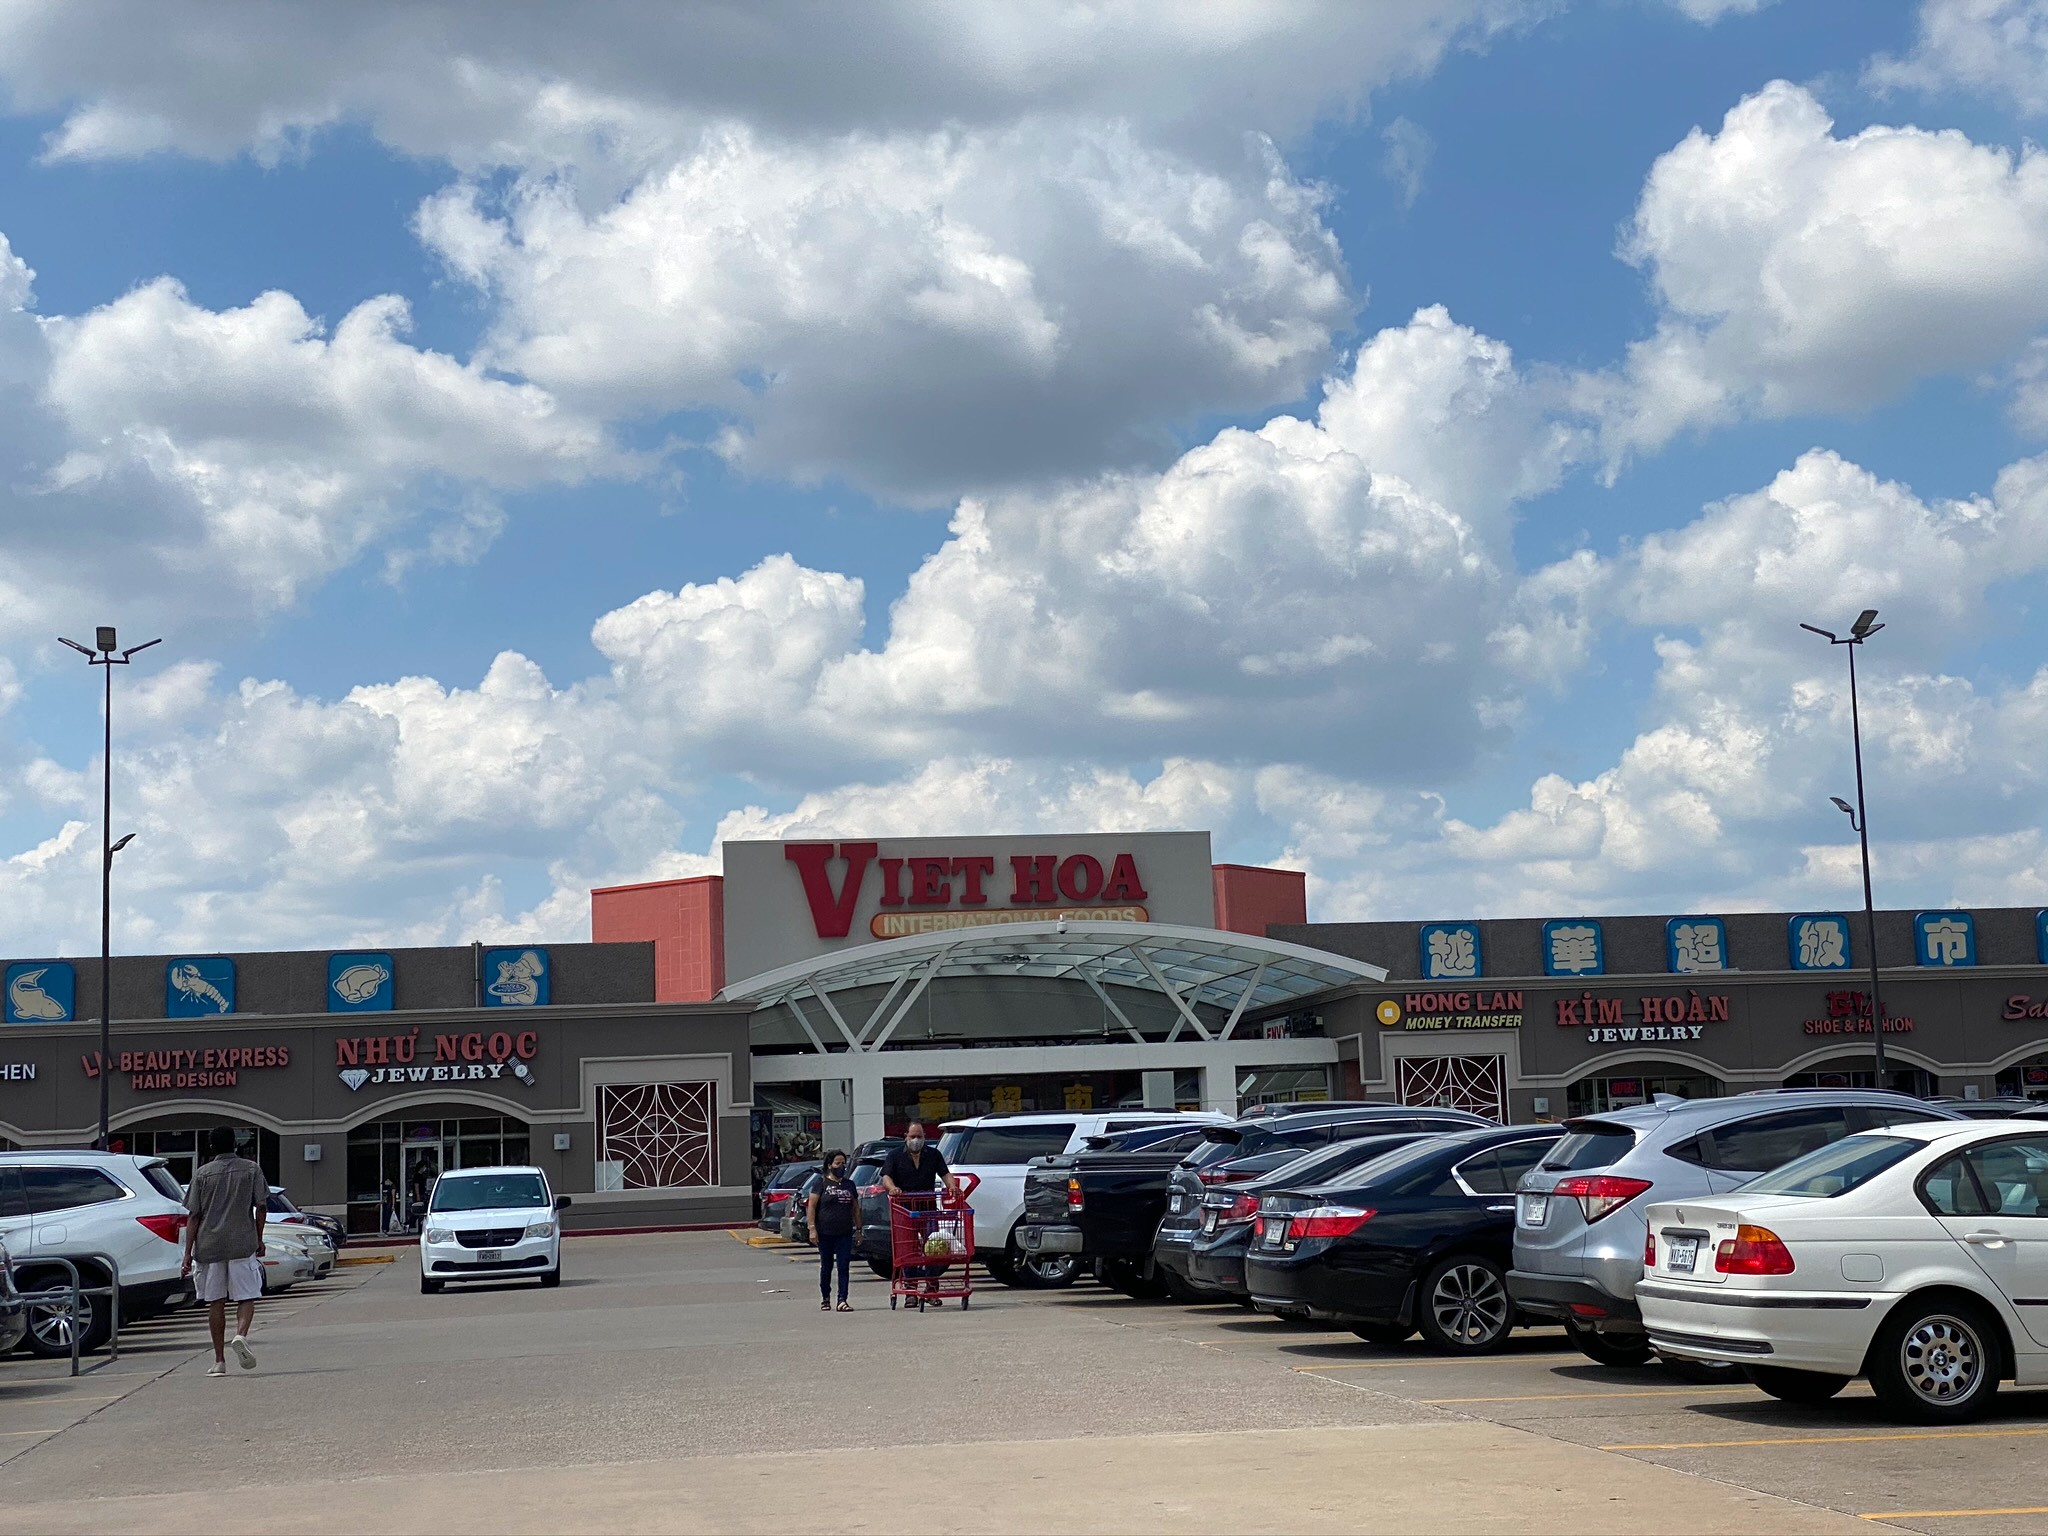 70's And 80's Mall Stores - Historic Houston - HAIF - Houston's